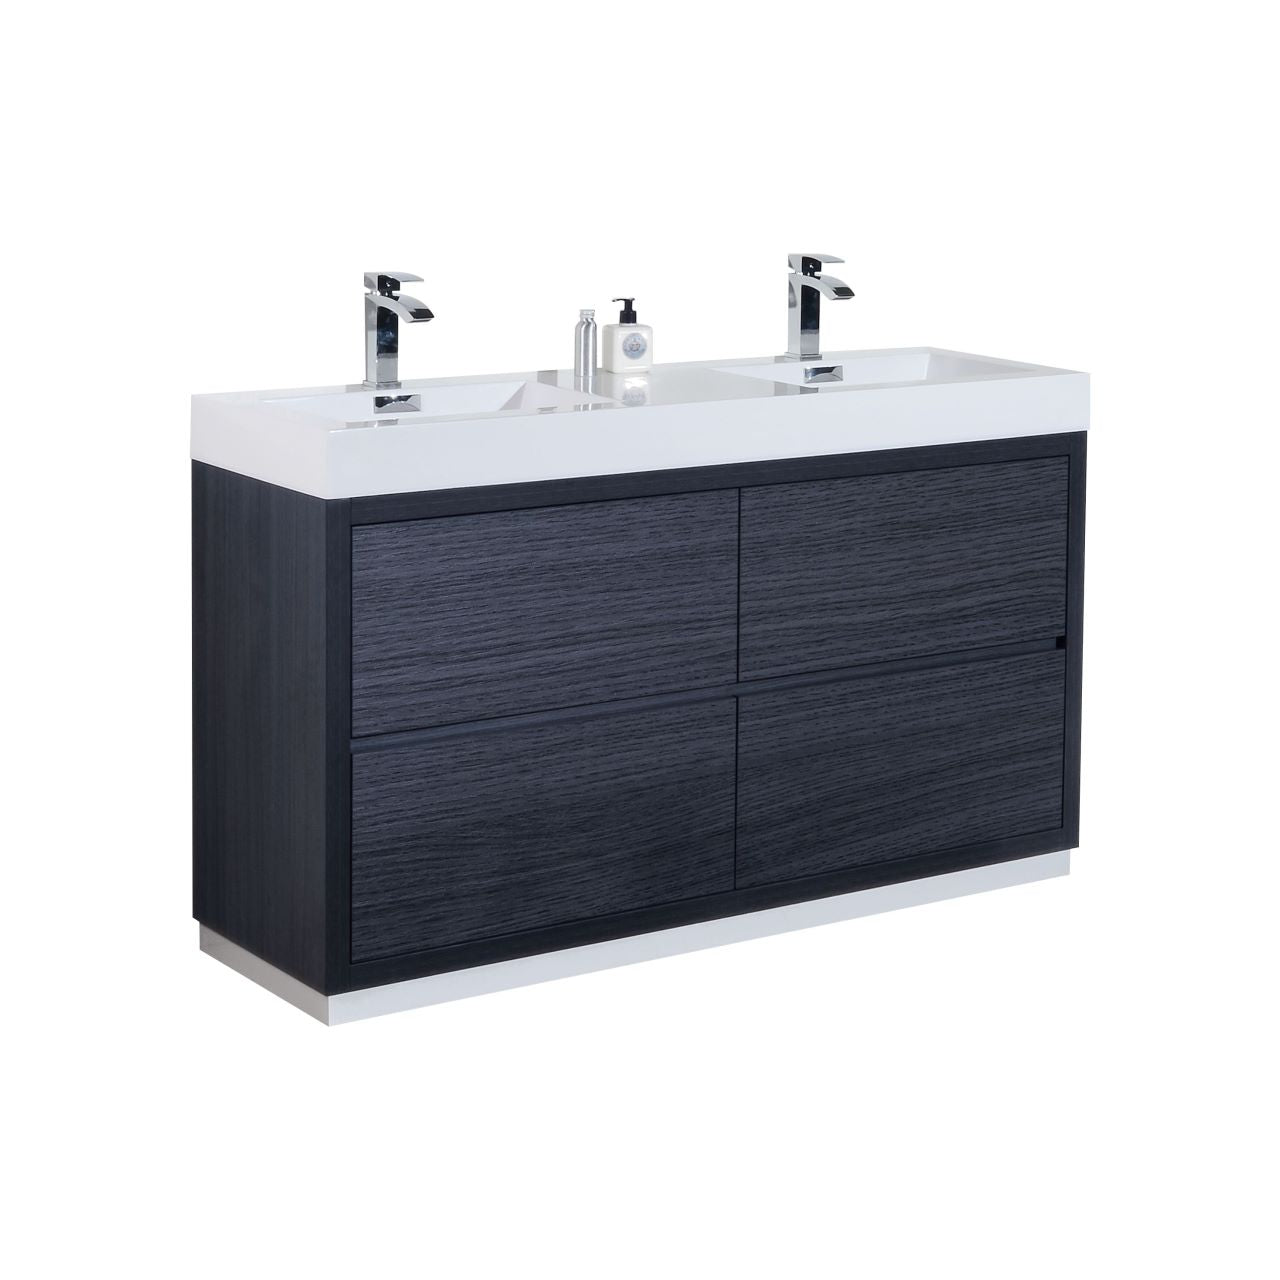 KUBEBATH Bliss FMB60D-GO 60" Double Bathroom Vanity in Gray Oak with White Acrylic Composite, Integrated Sinks, Angled View